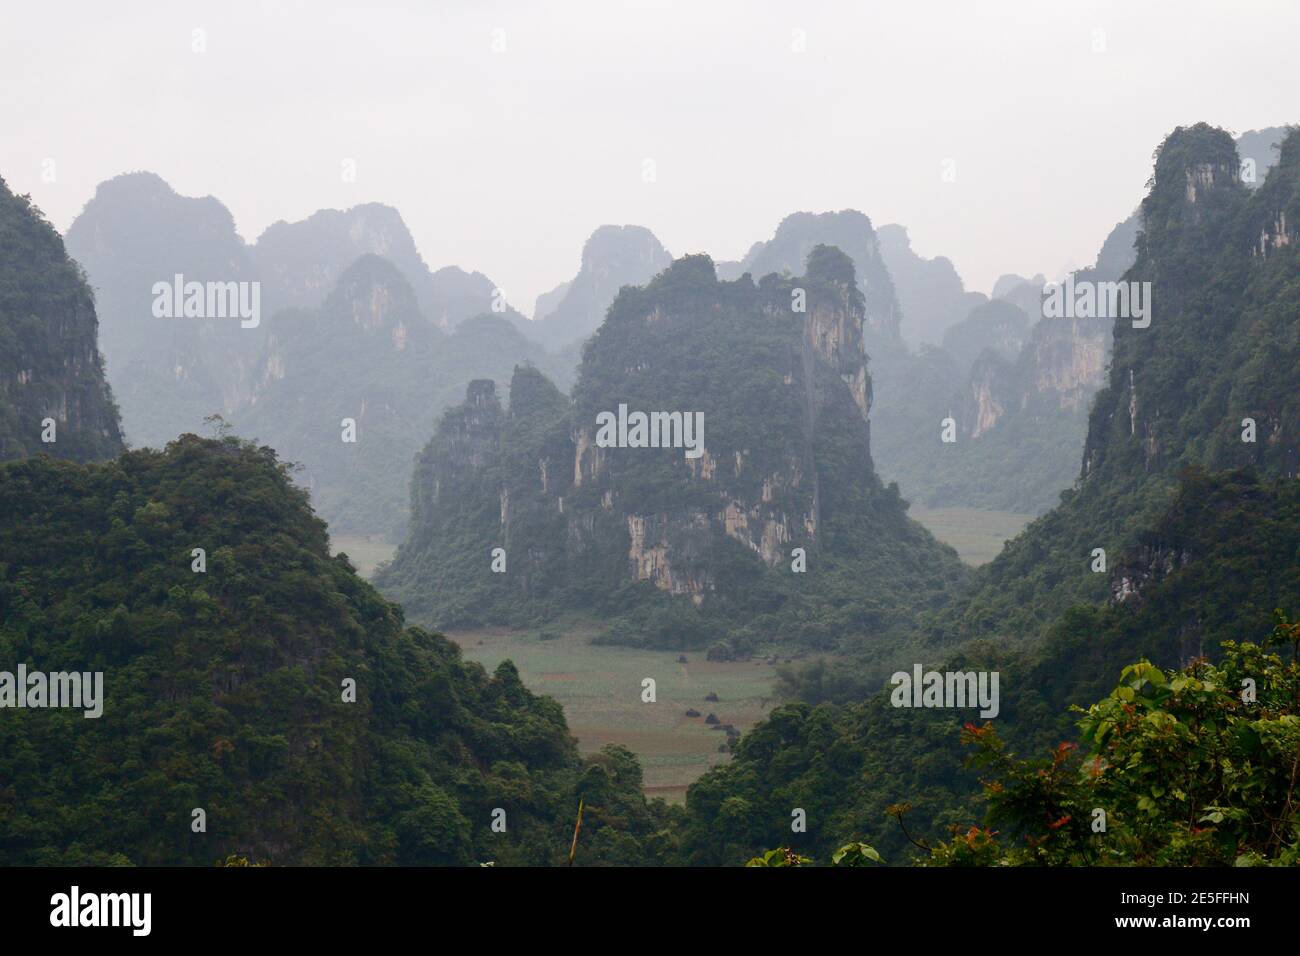 Karst landscape and mist, Longchuan County, Guangxi Province, China 23rd April 2016 Stock Photo